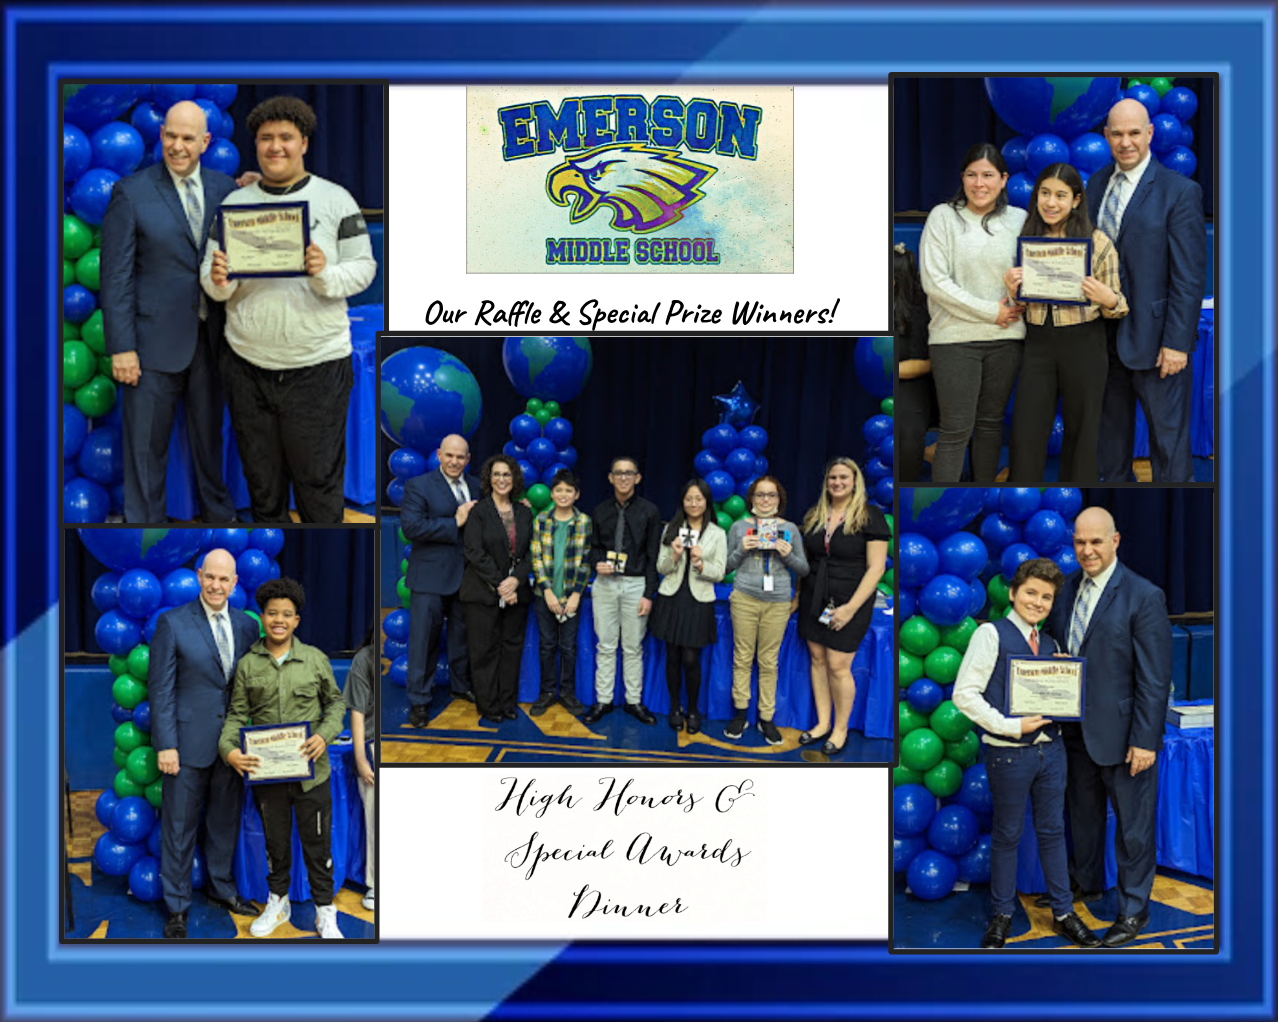 Awards Ceremony For Emerson Middle School Students